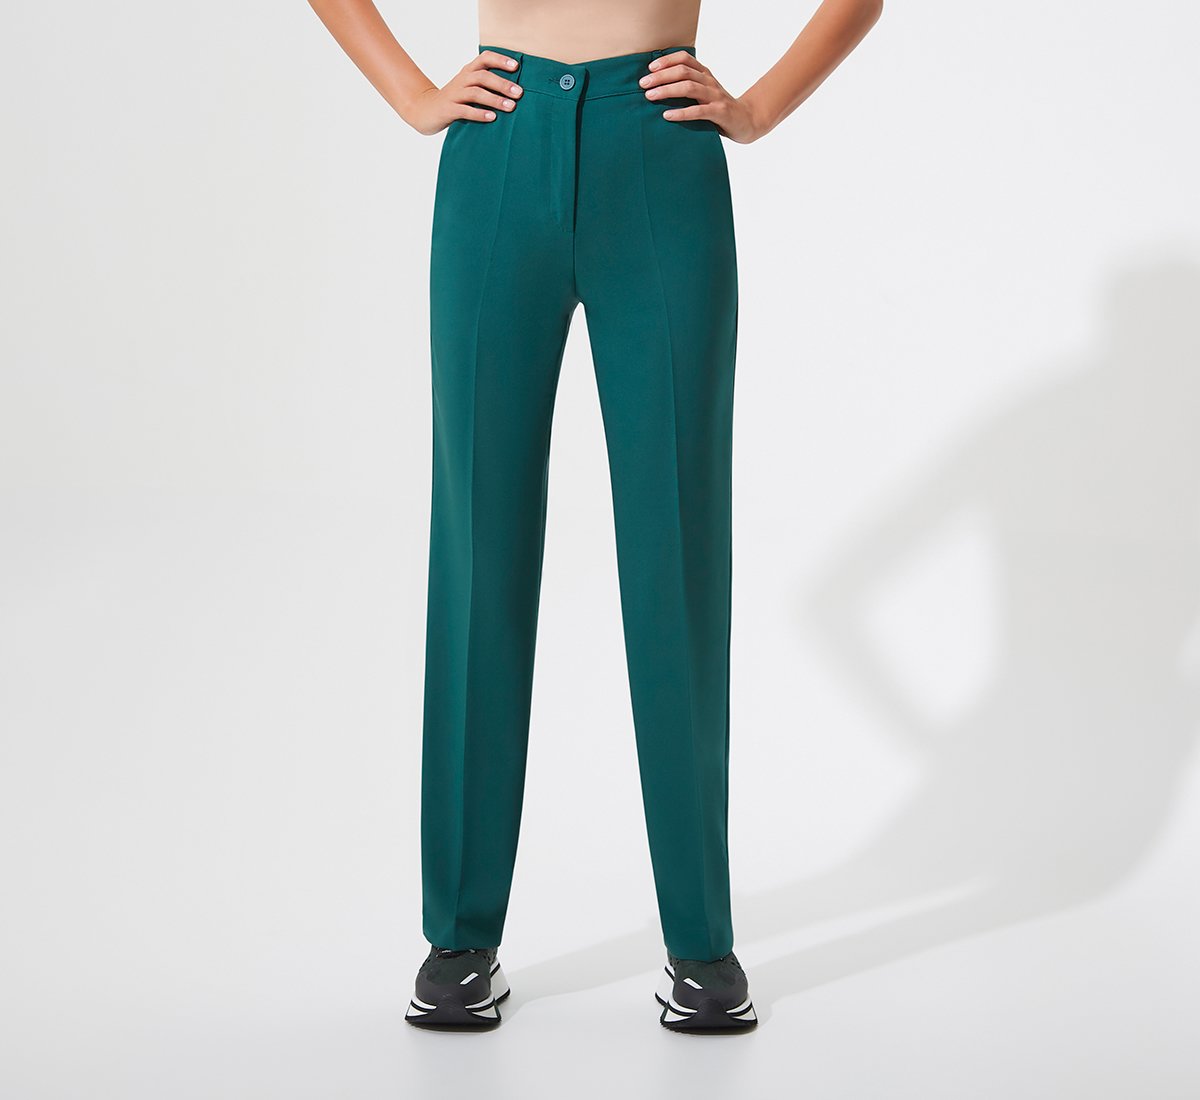 Green high waisted trousers